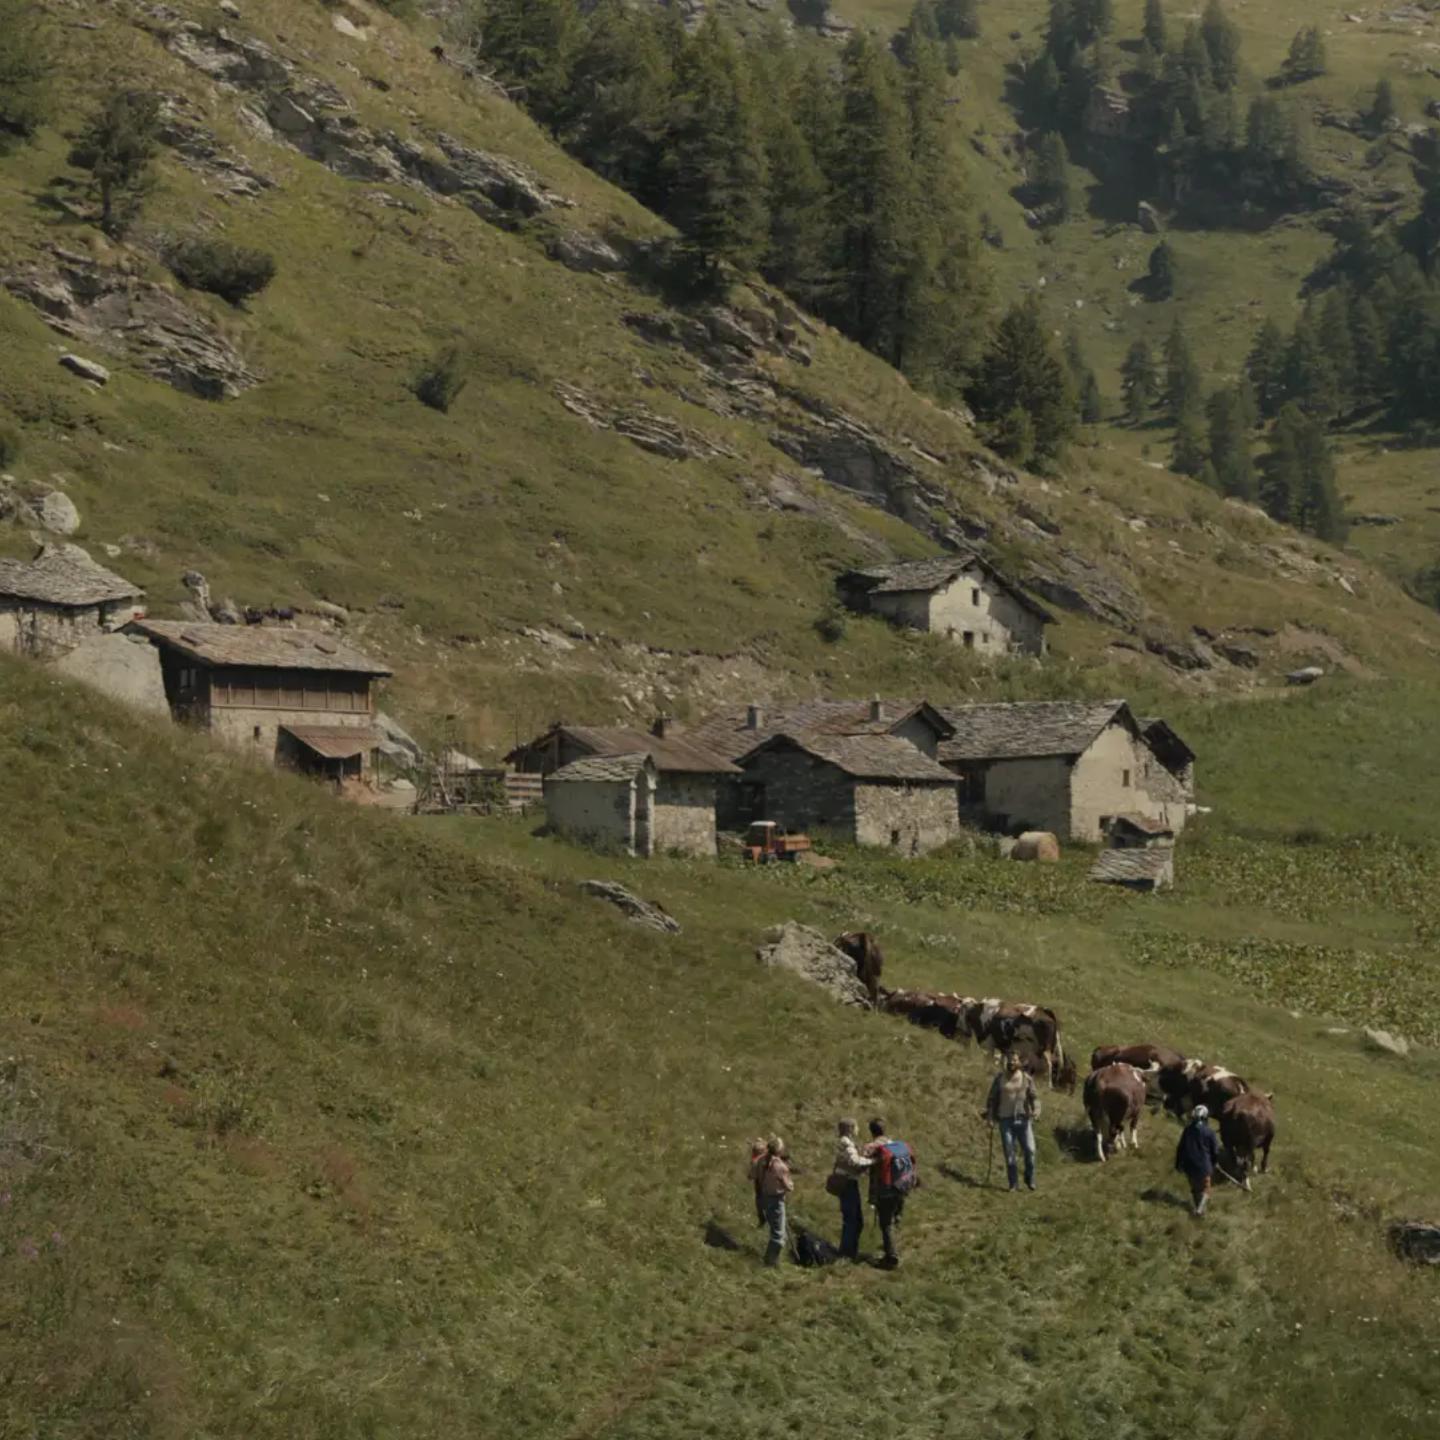 a group of people walking on a hill with a house on it